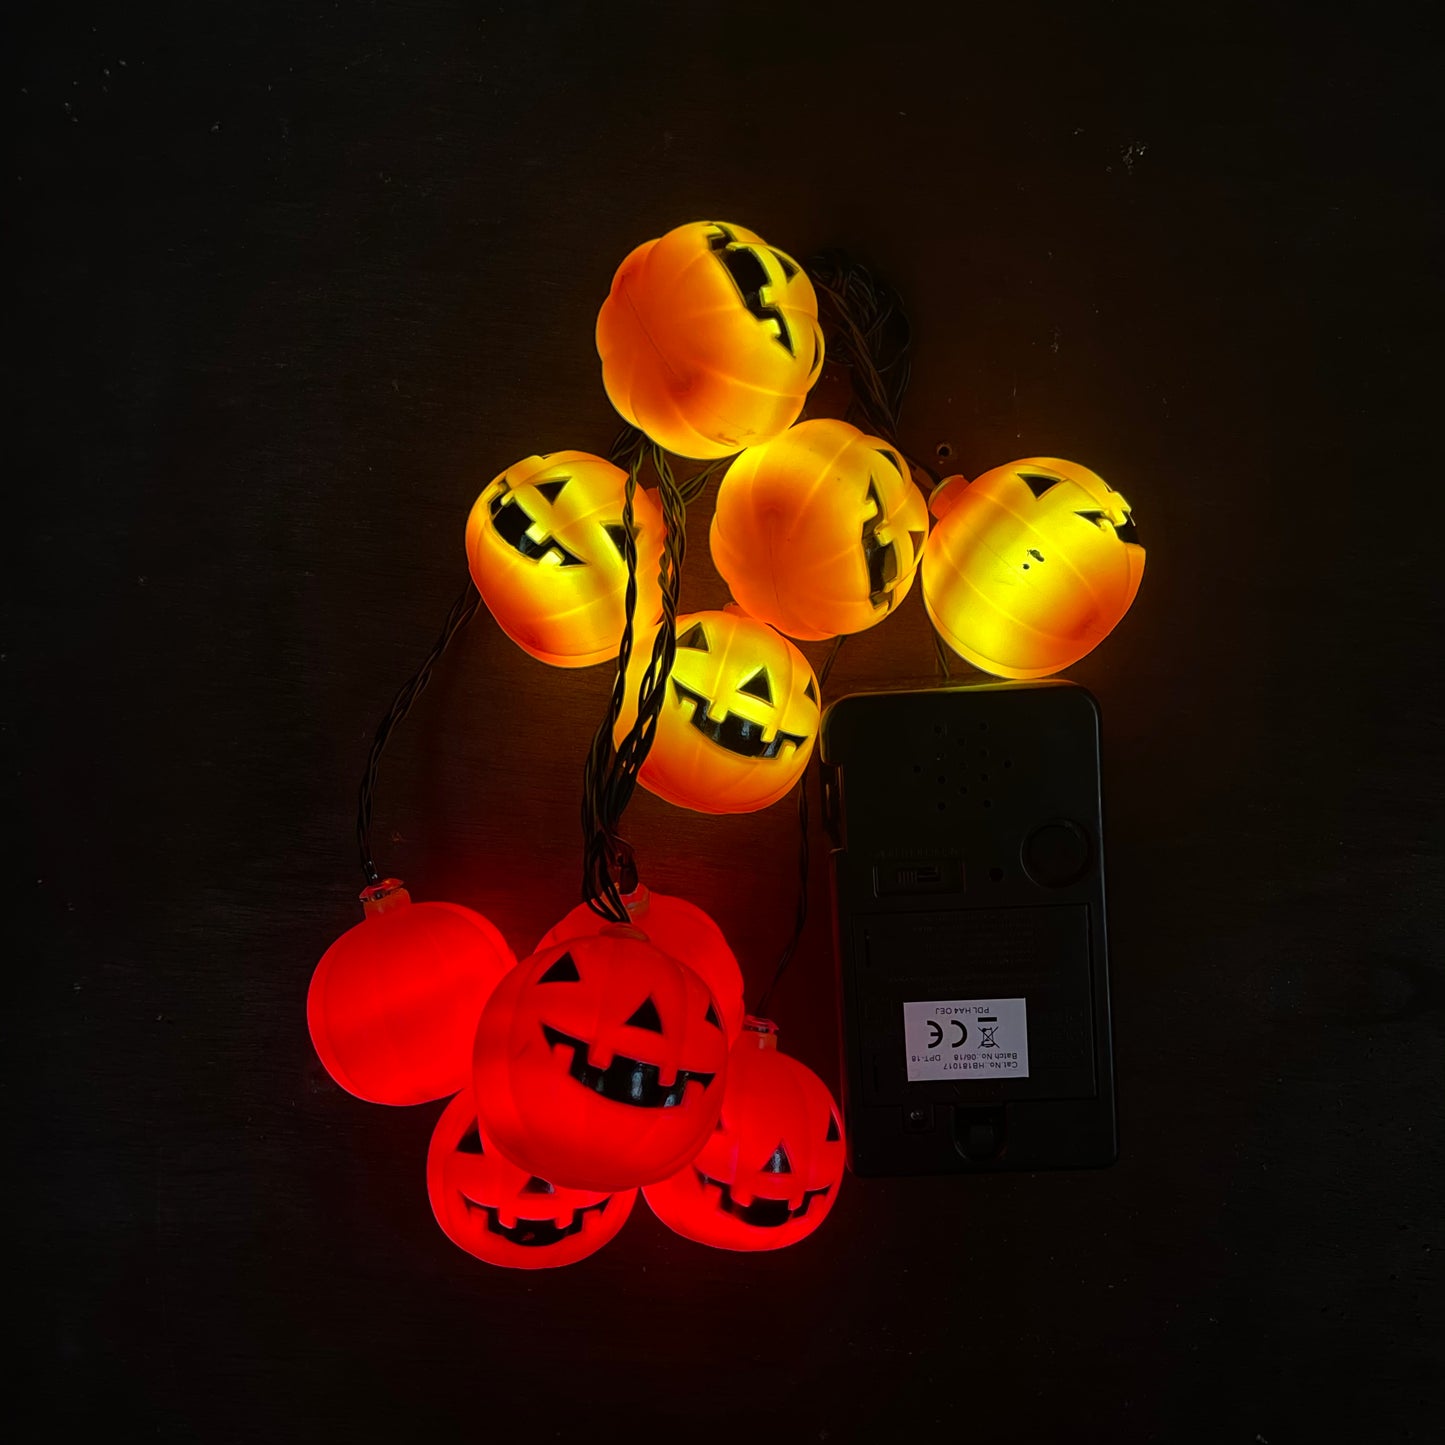 Orange LED pumpkin lights clumped together on a plain backgroud next to the battery box to show of the lights clearer